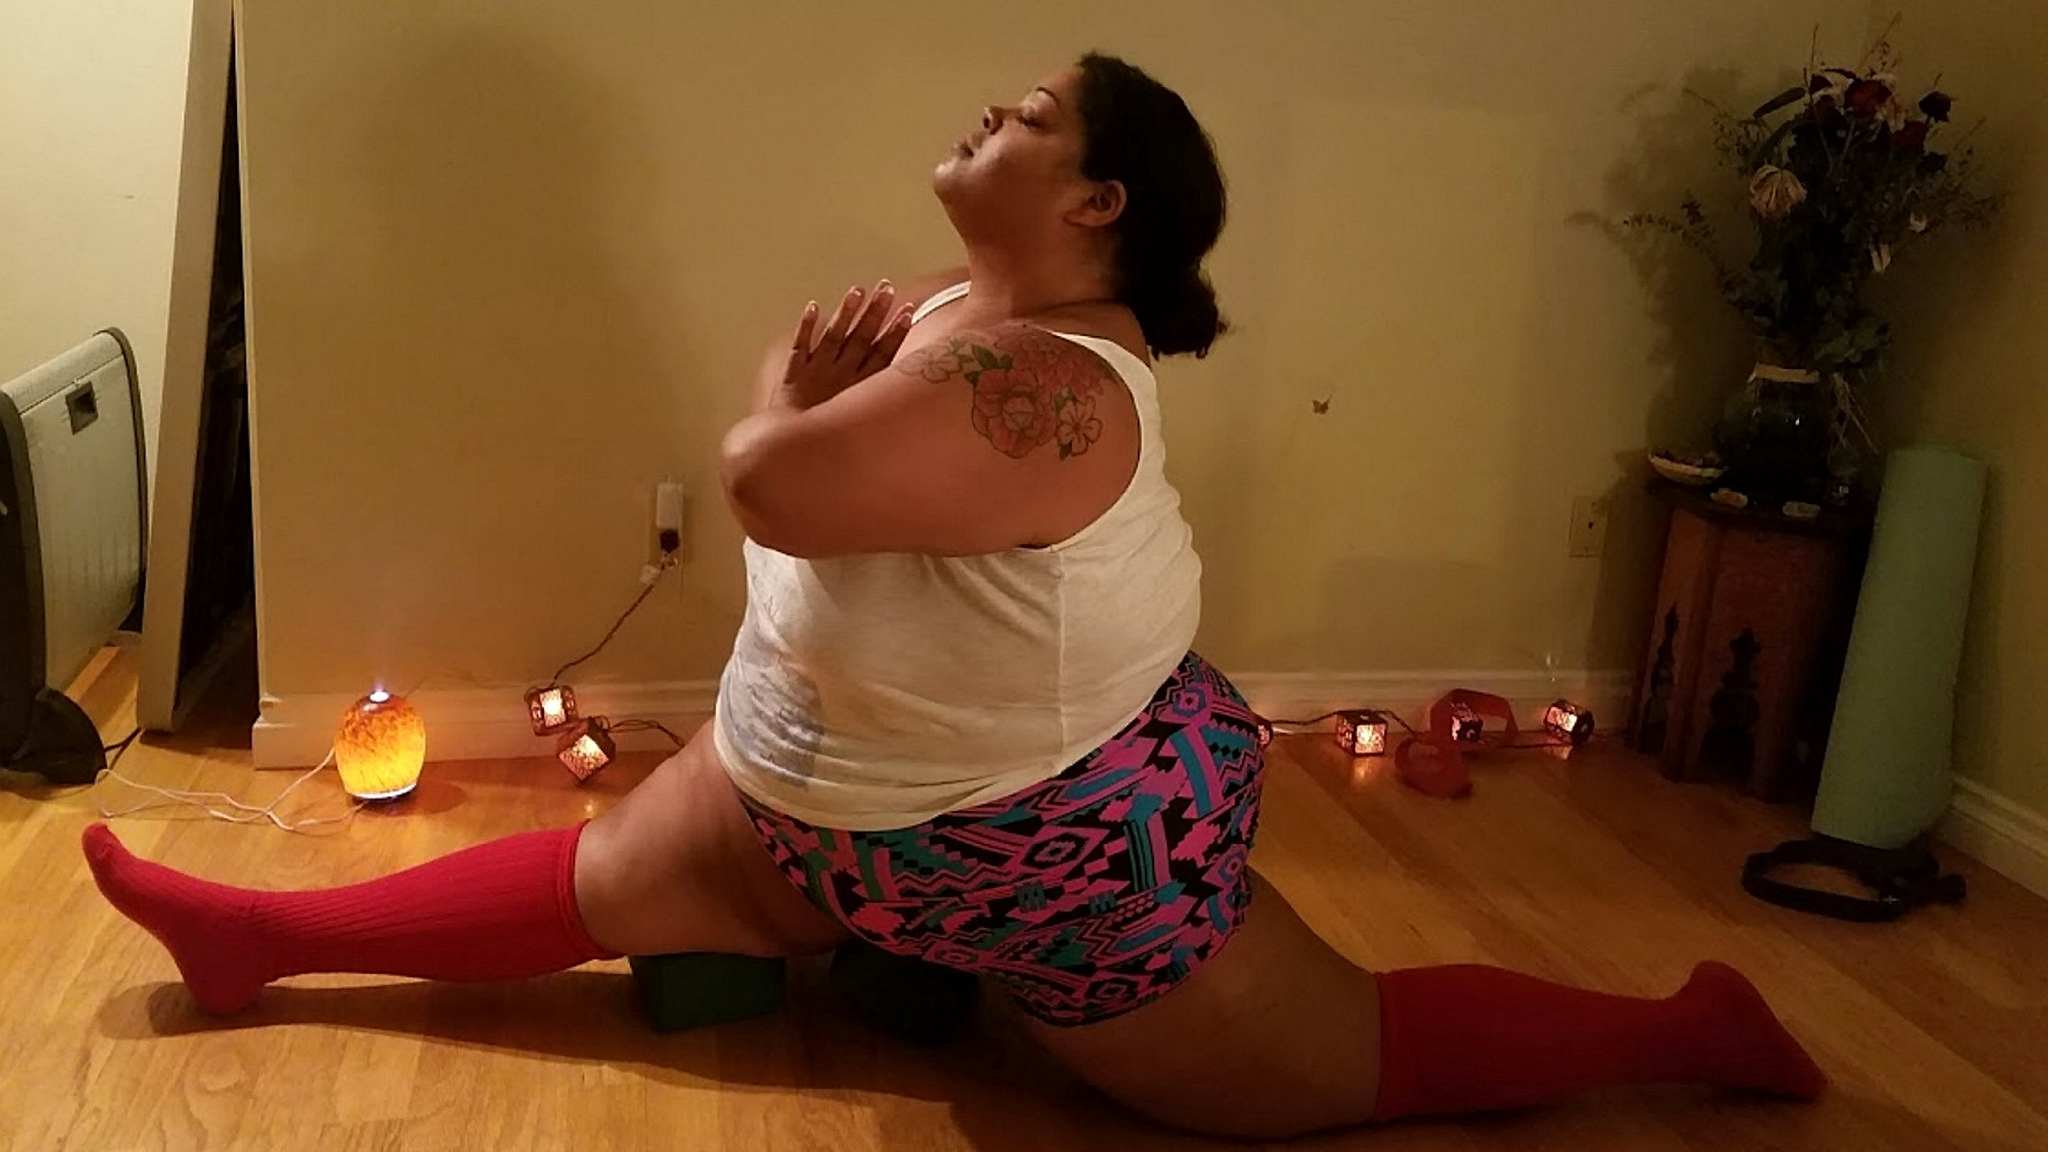 Plus-size yoga instructor shows yoga is for everyone